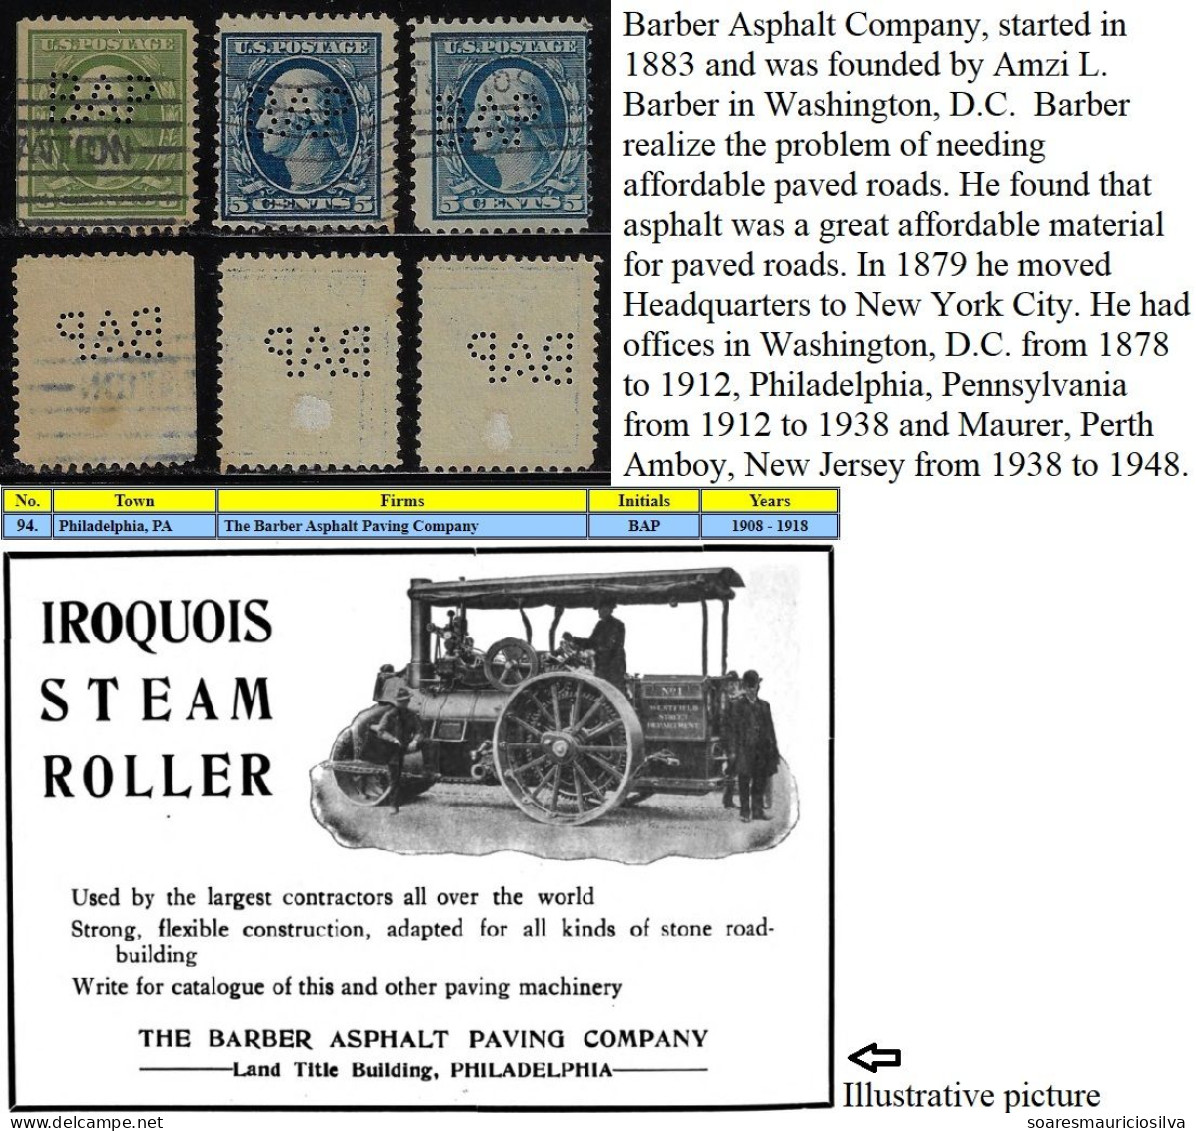 USA United States 1908/1918 3 Stamp Perfin BAP By The Barber Asphalt Paving Company From Philadelphia Lochung Perfore - Perforados